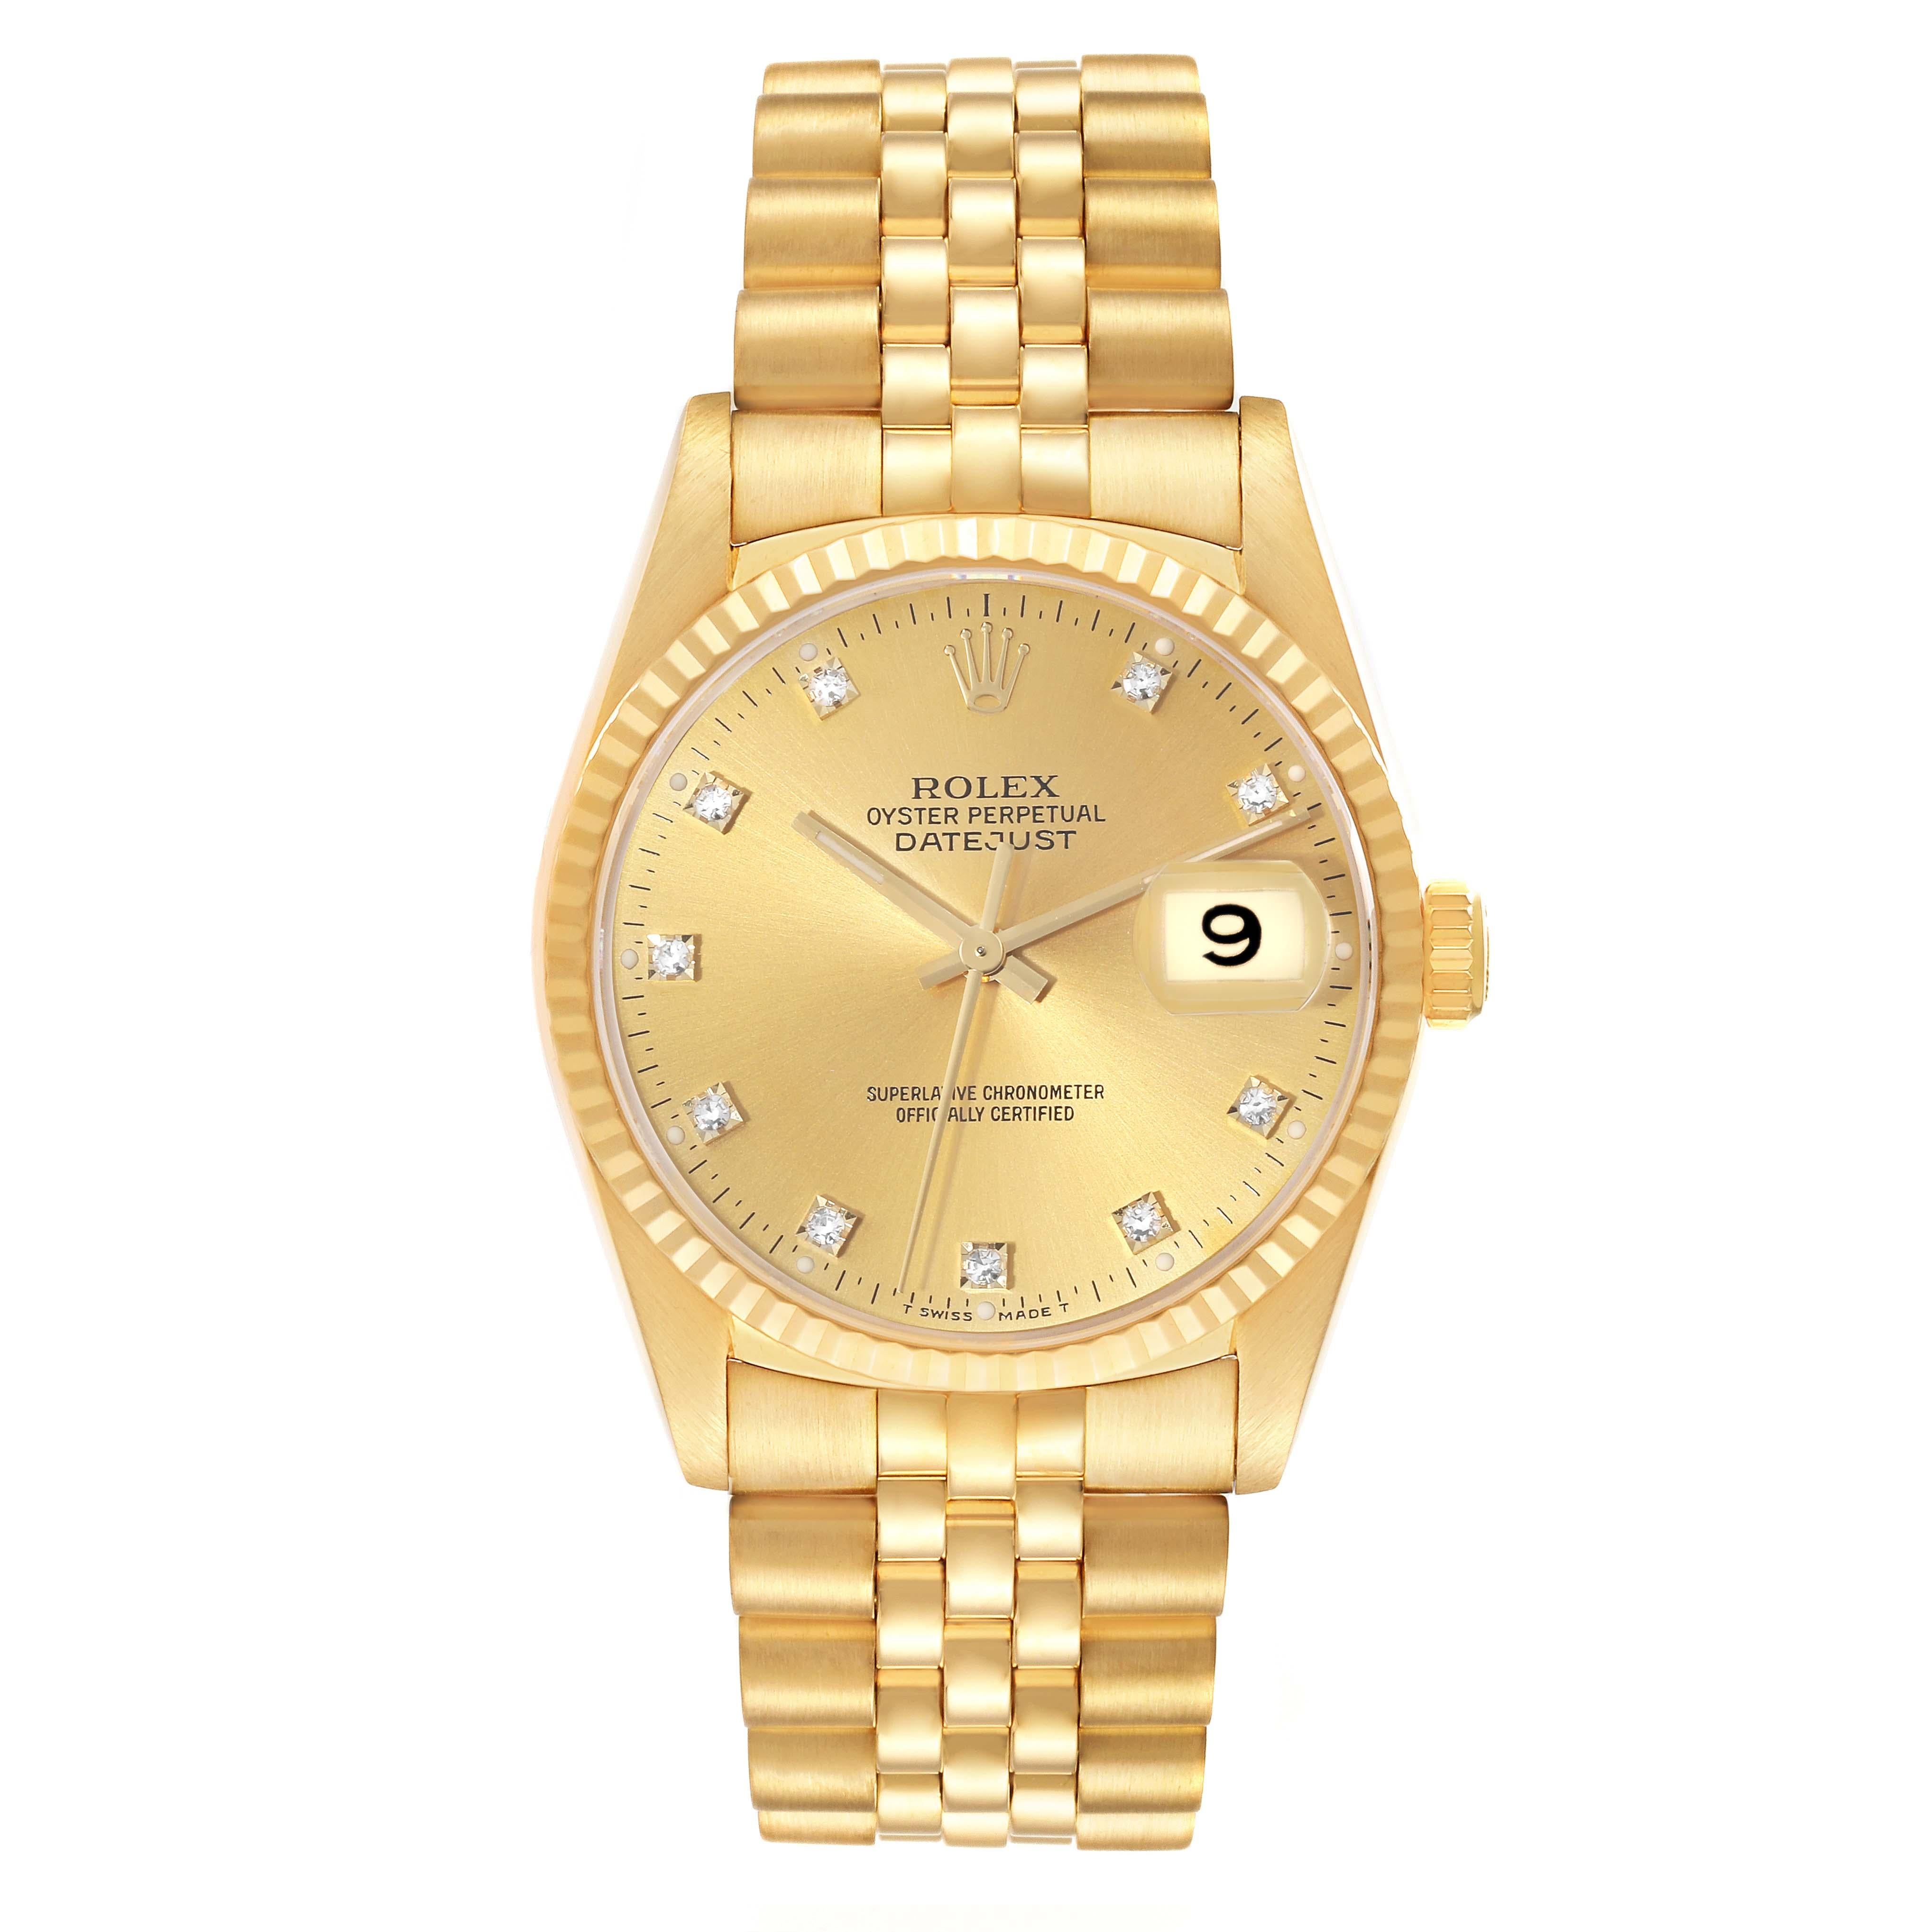 Rolex Datejust Yellow Gold Champagne Diamond Dial Mens Watch 16238. Officially certified chronometer self-winding movement. 18k yellow gold case 36.0 mm in diameter. Rolex logo on a crown. 18k yellow gold fluted bezel. Scratch resistant sapphire